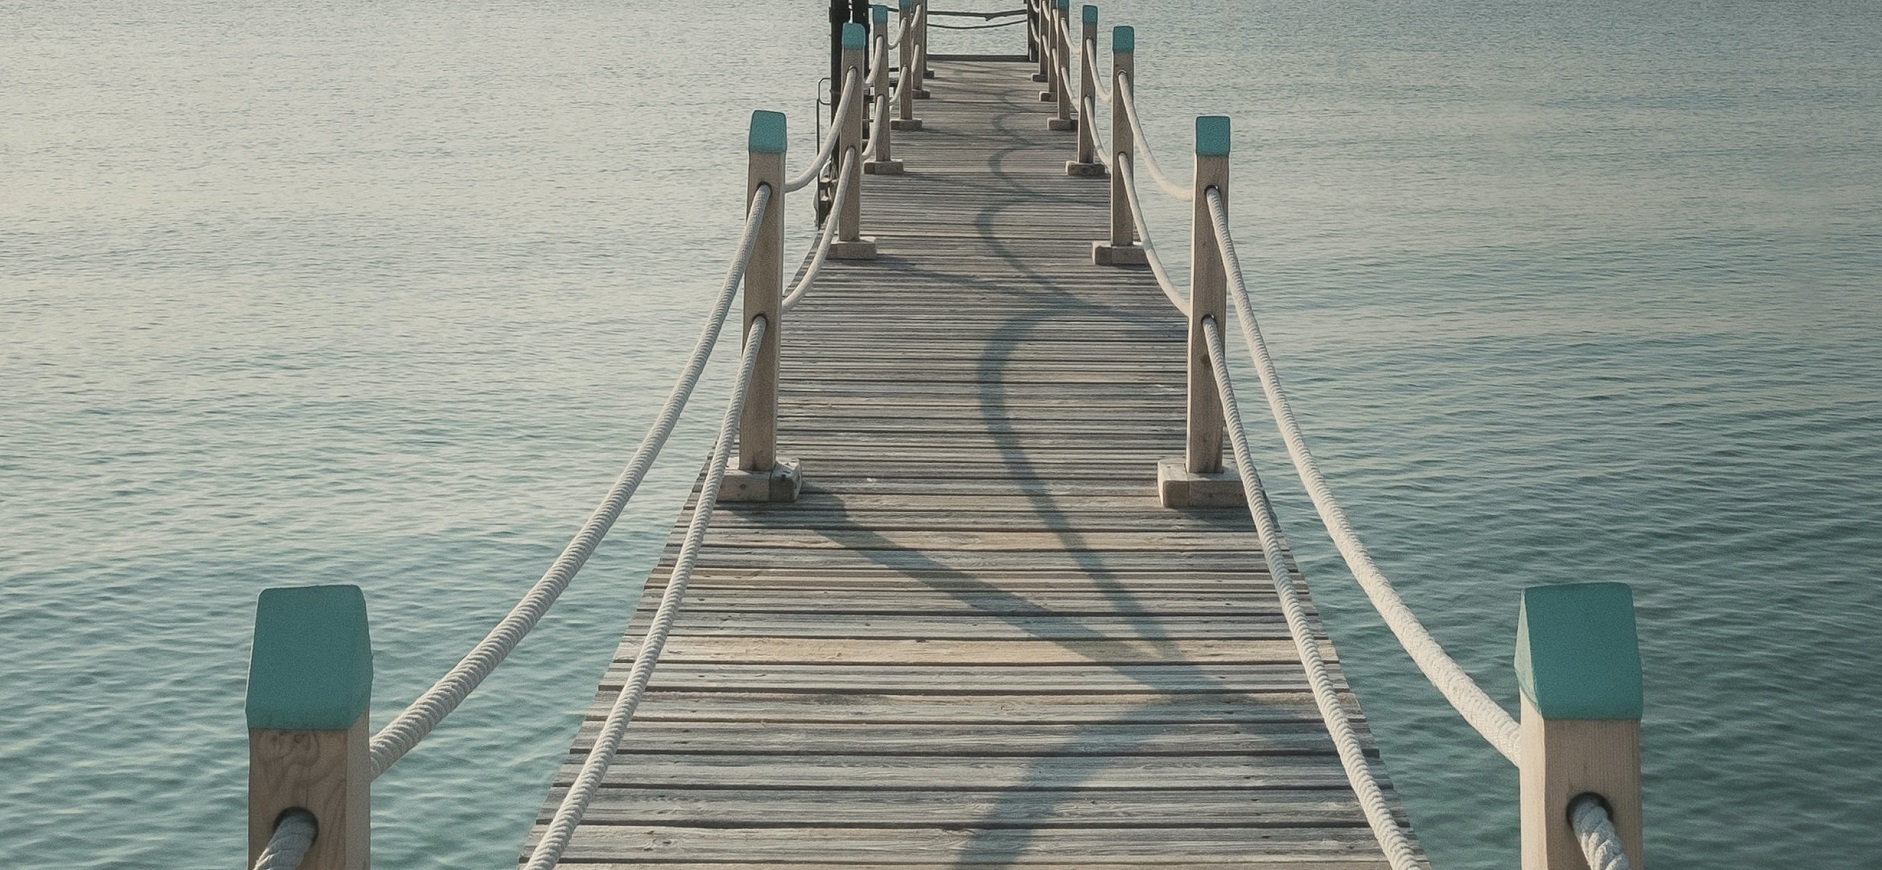 dock or pier on water